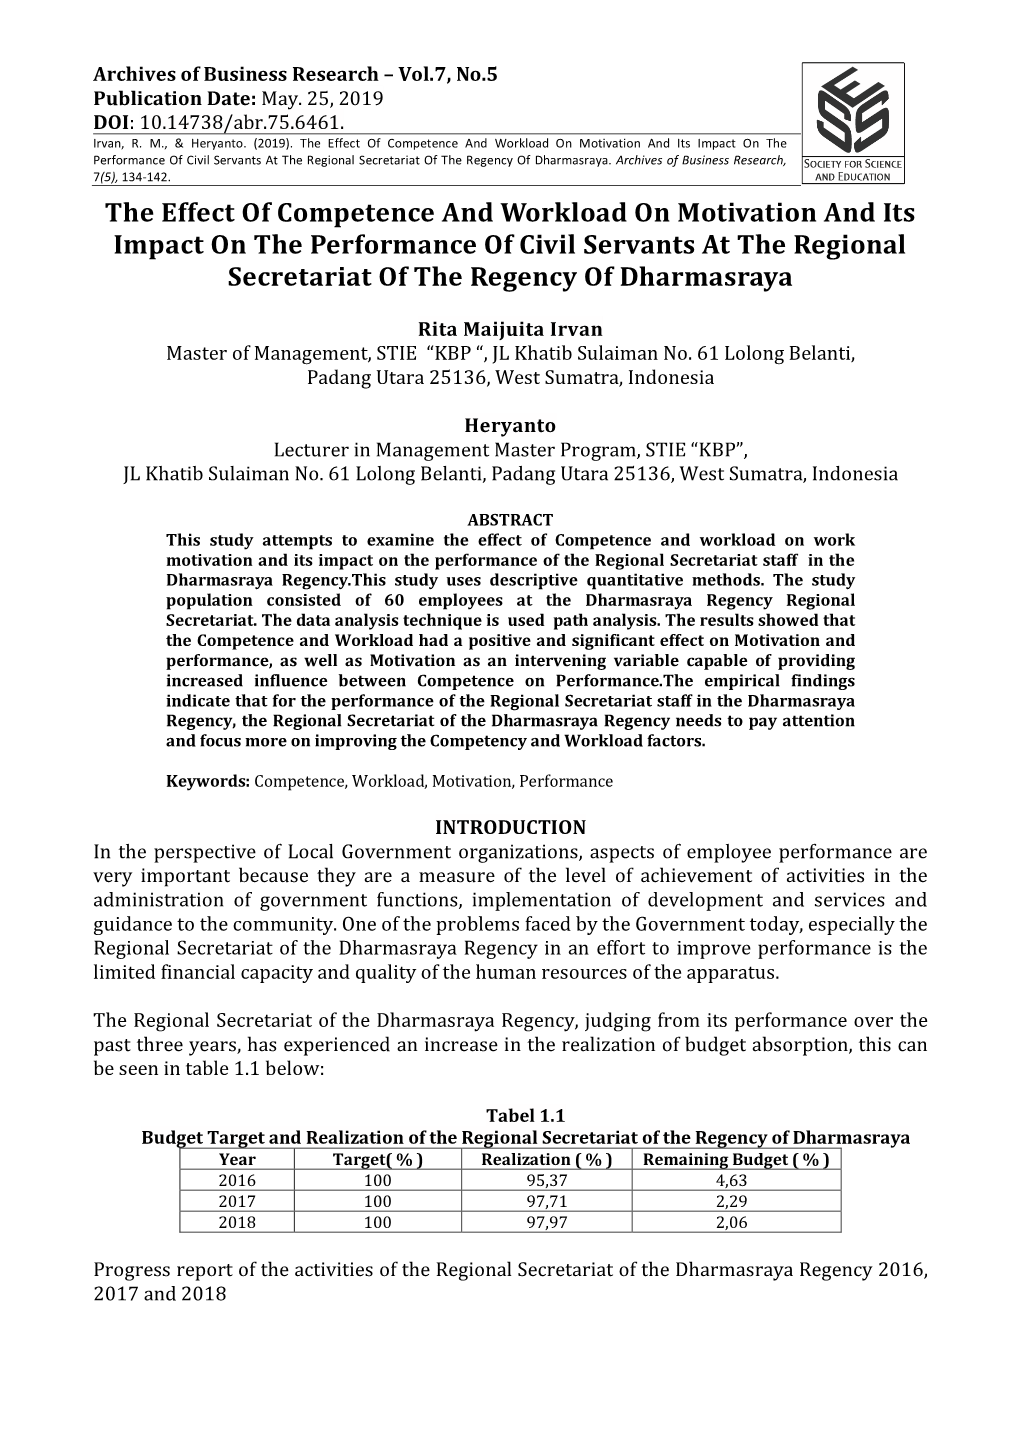 The Effect of Competence and Workload on Motivation and Its Impact on the Performance of Civil Servants at the Regional Secretariat of the Regency of Dharmasraya